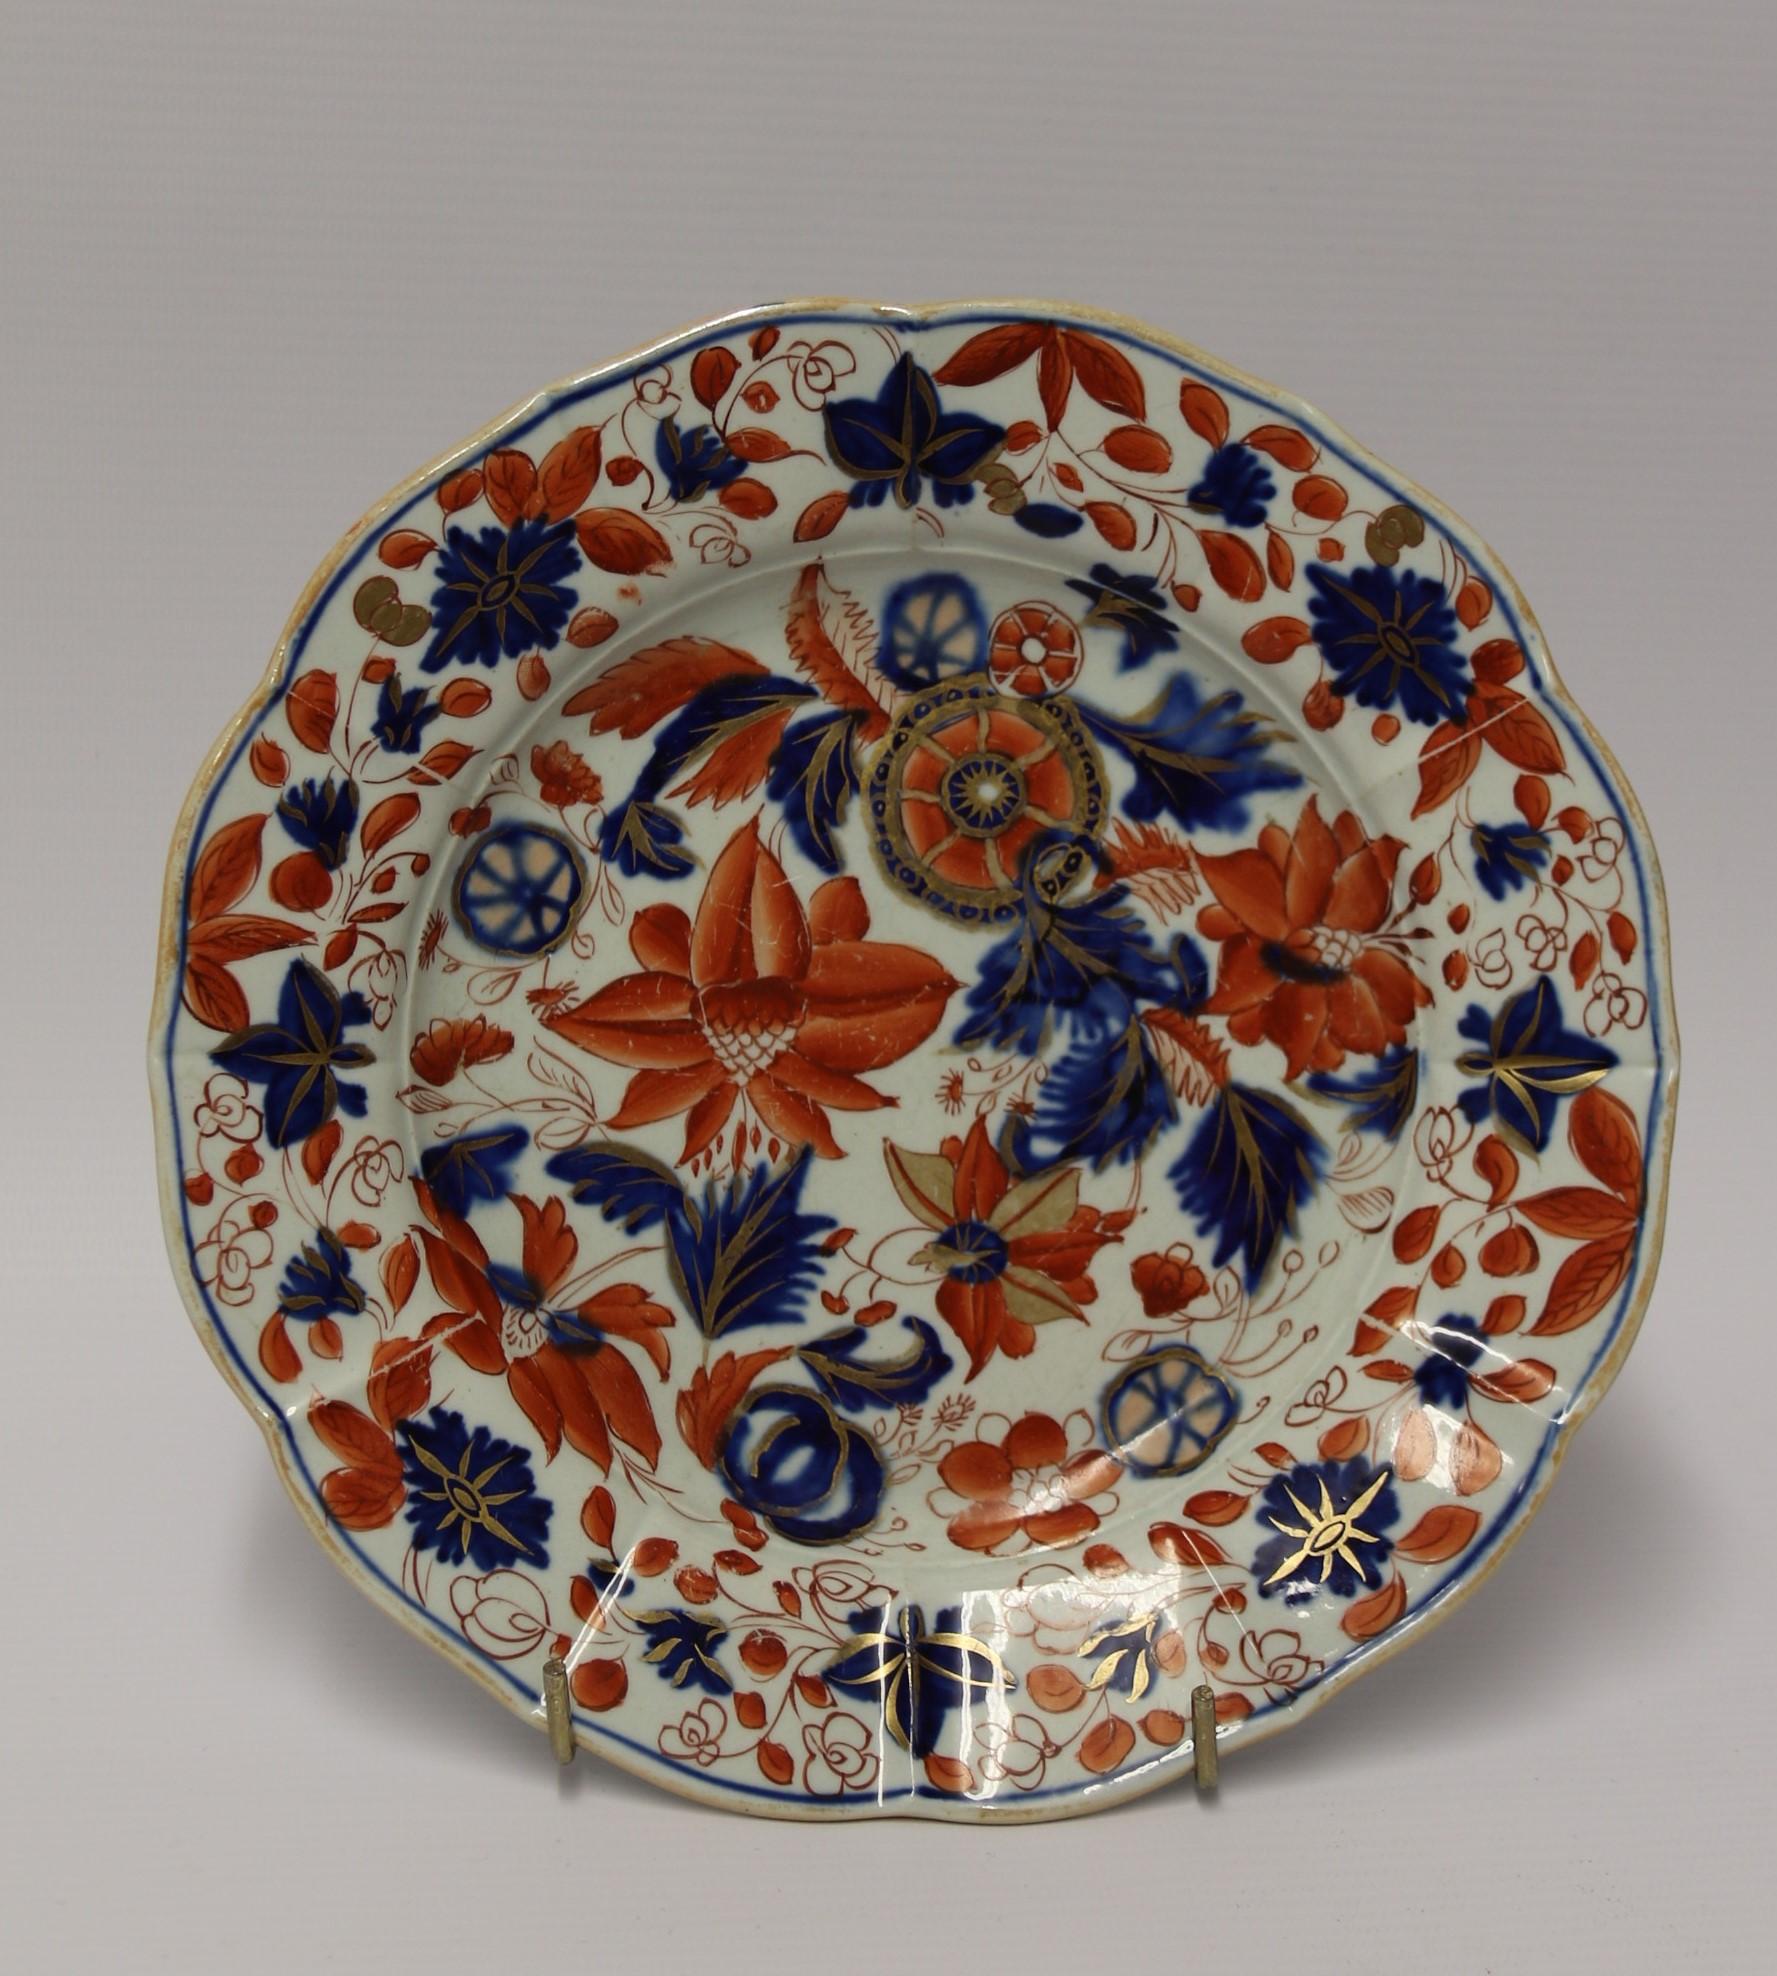 This vibrant early 19th century hand painted Masons Ironstone dessert service consists of a matching set of ten plates and a most unusual comport. This is raised on an oval base with twin supports. The plates and comport are beautifully hand painted